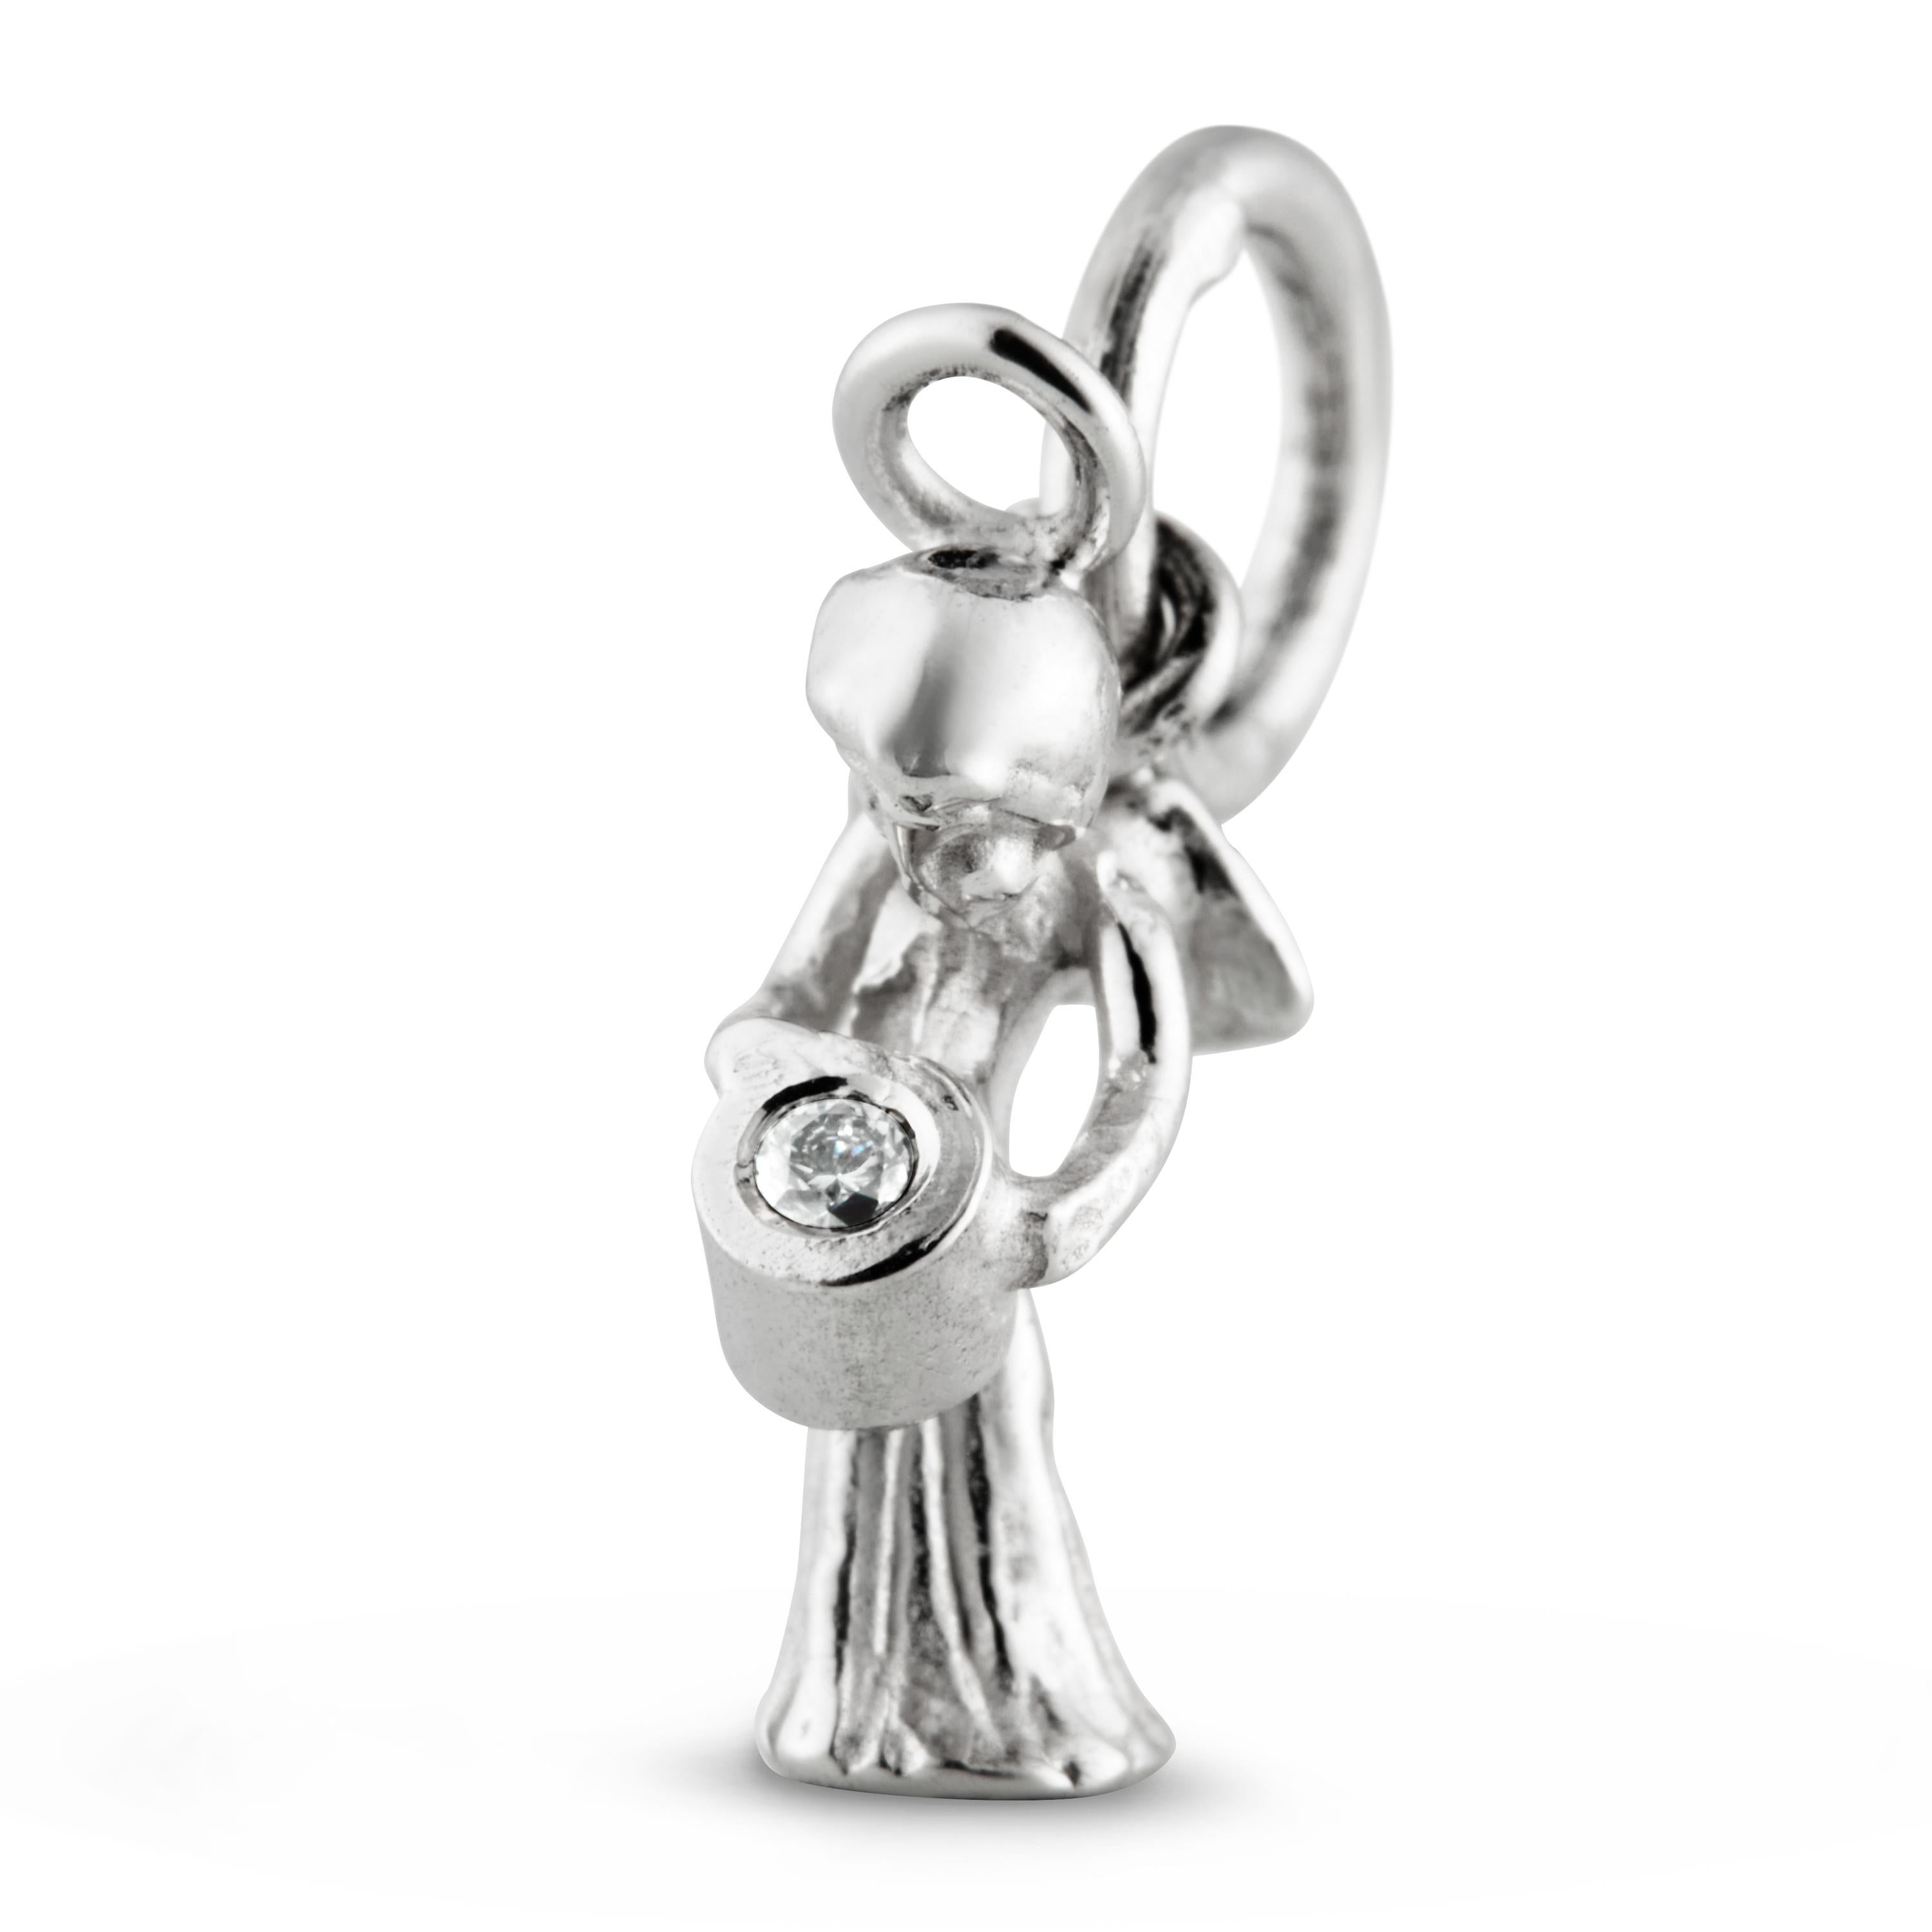 Guardian Angel Pendant With Chain Traceable Diamond 18k White Gold by Rocks For Life
The Guardian Angel is designed as lovetoken for any occasion and for all ages.  
The Angel comes with a 40 cm 18 karat white gold chain.

The Angel holds a